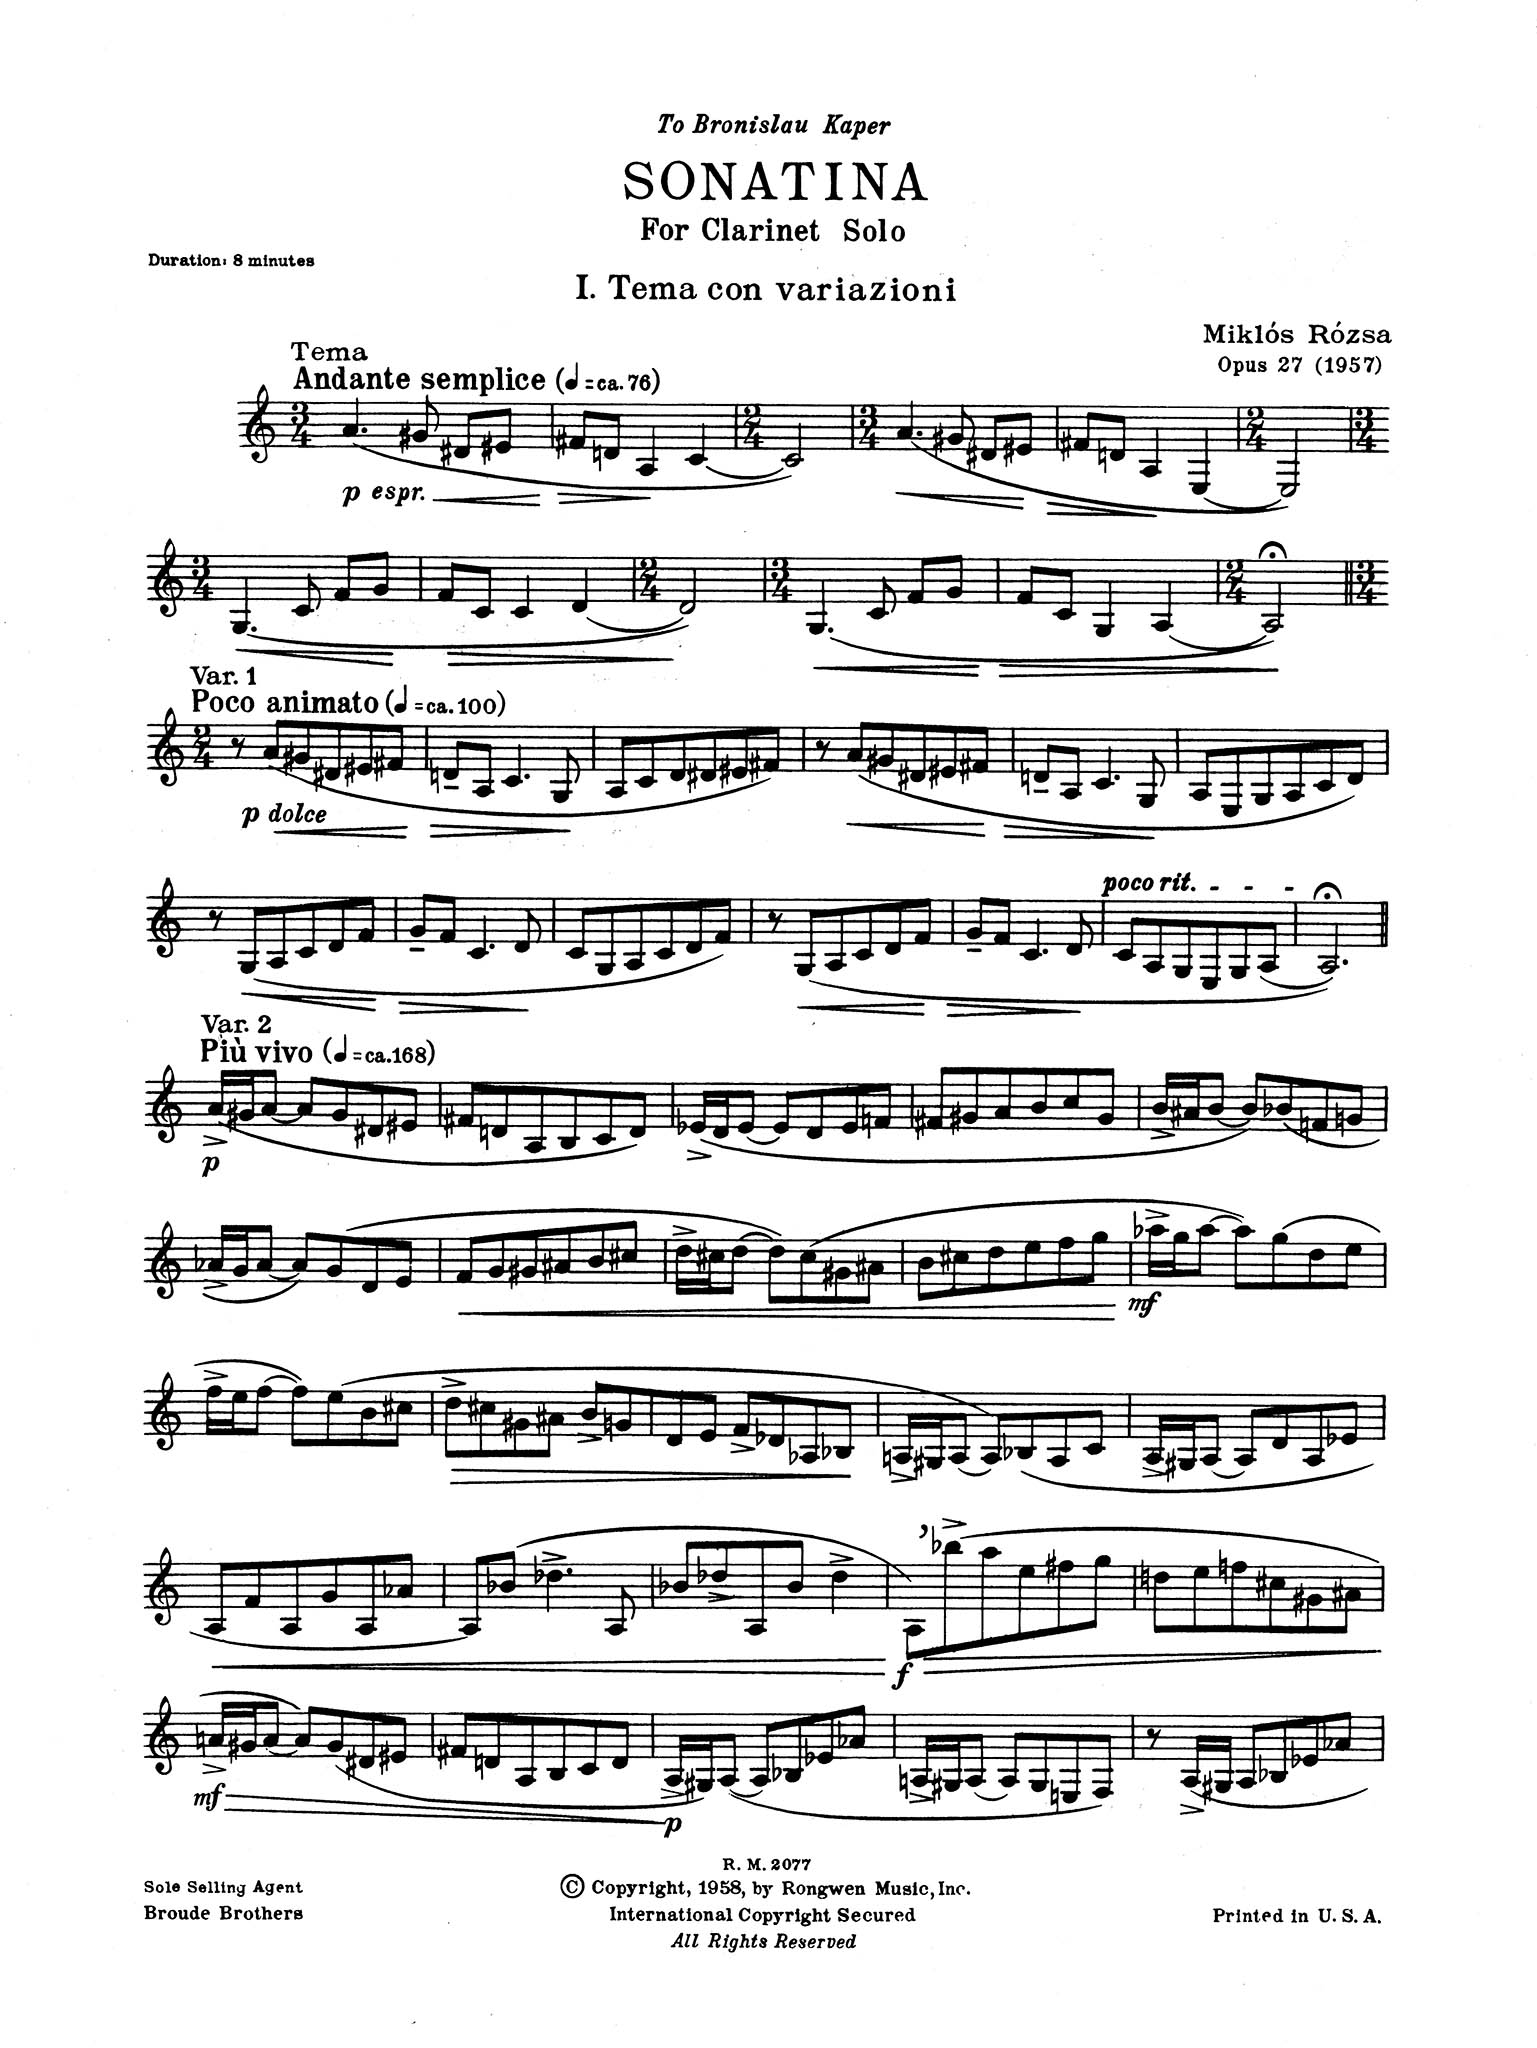 Sonatina for Clarinet Solo, Op. 27 - Movement 1